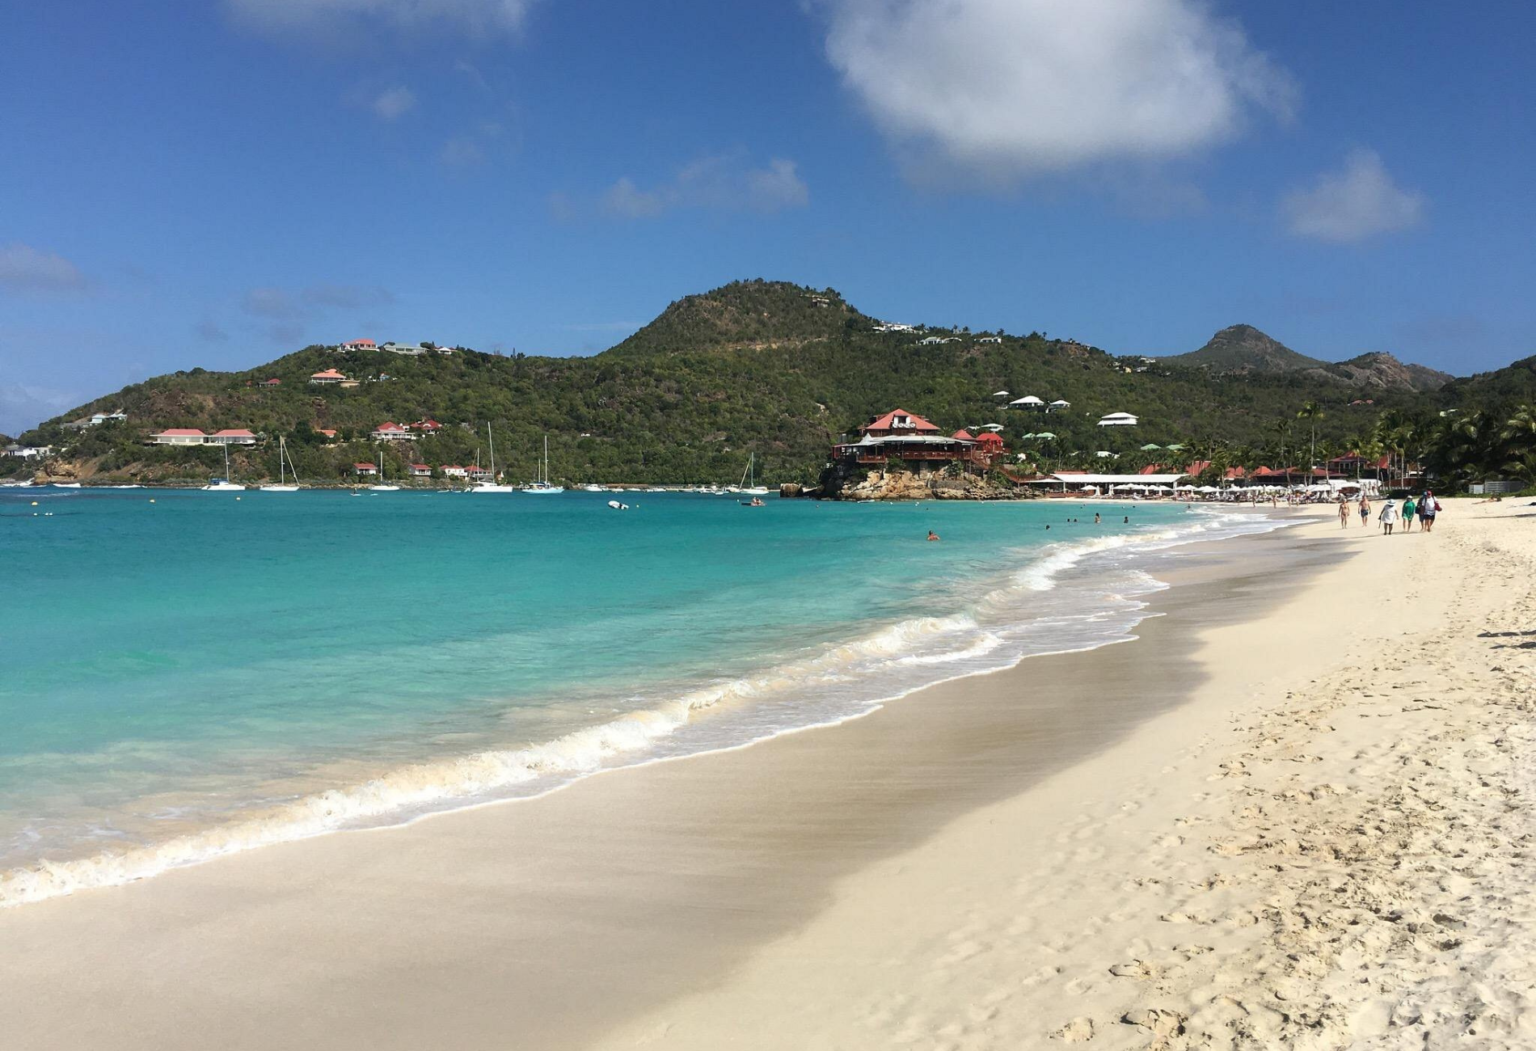 turquoise waters and cove of one of the best beaches in St. Barts